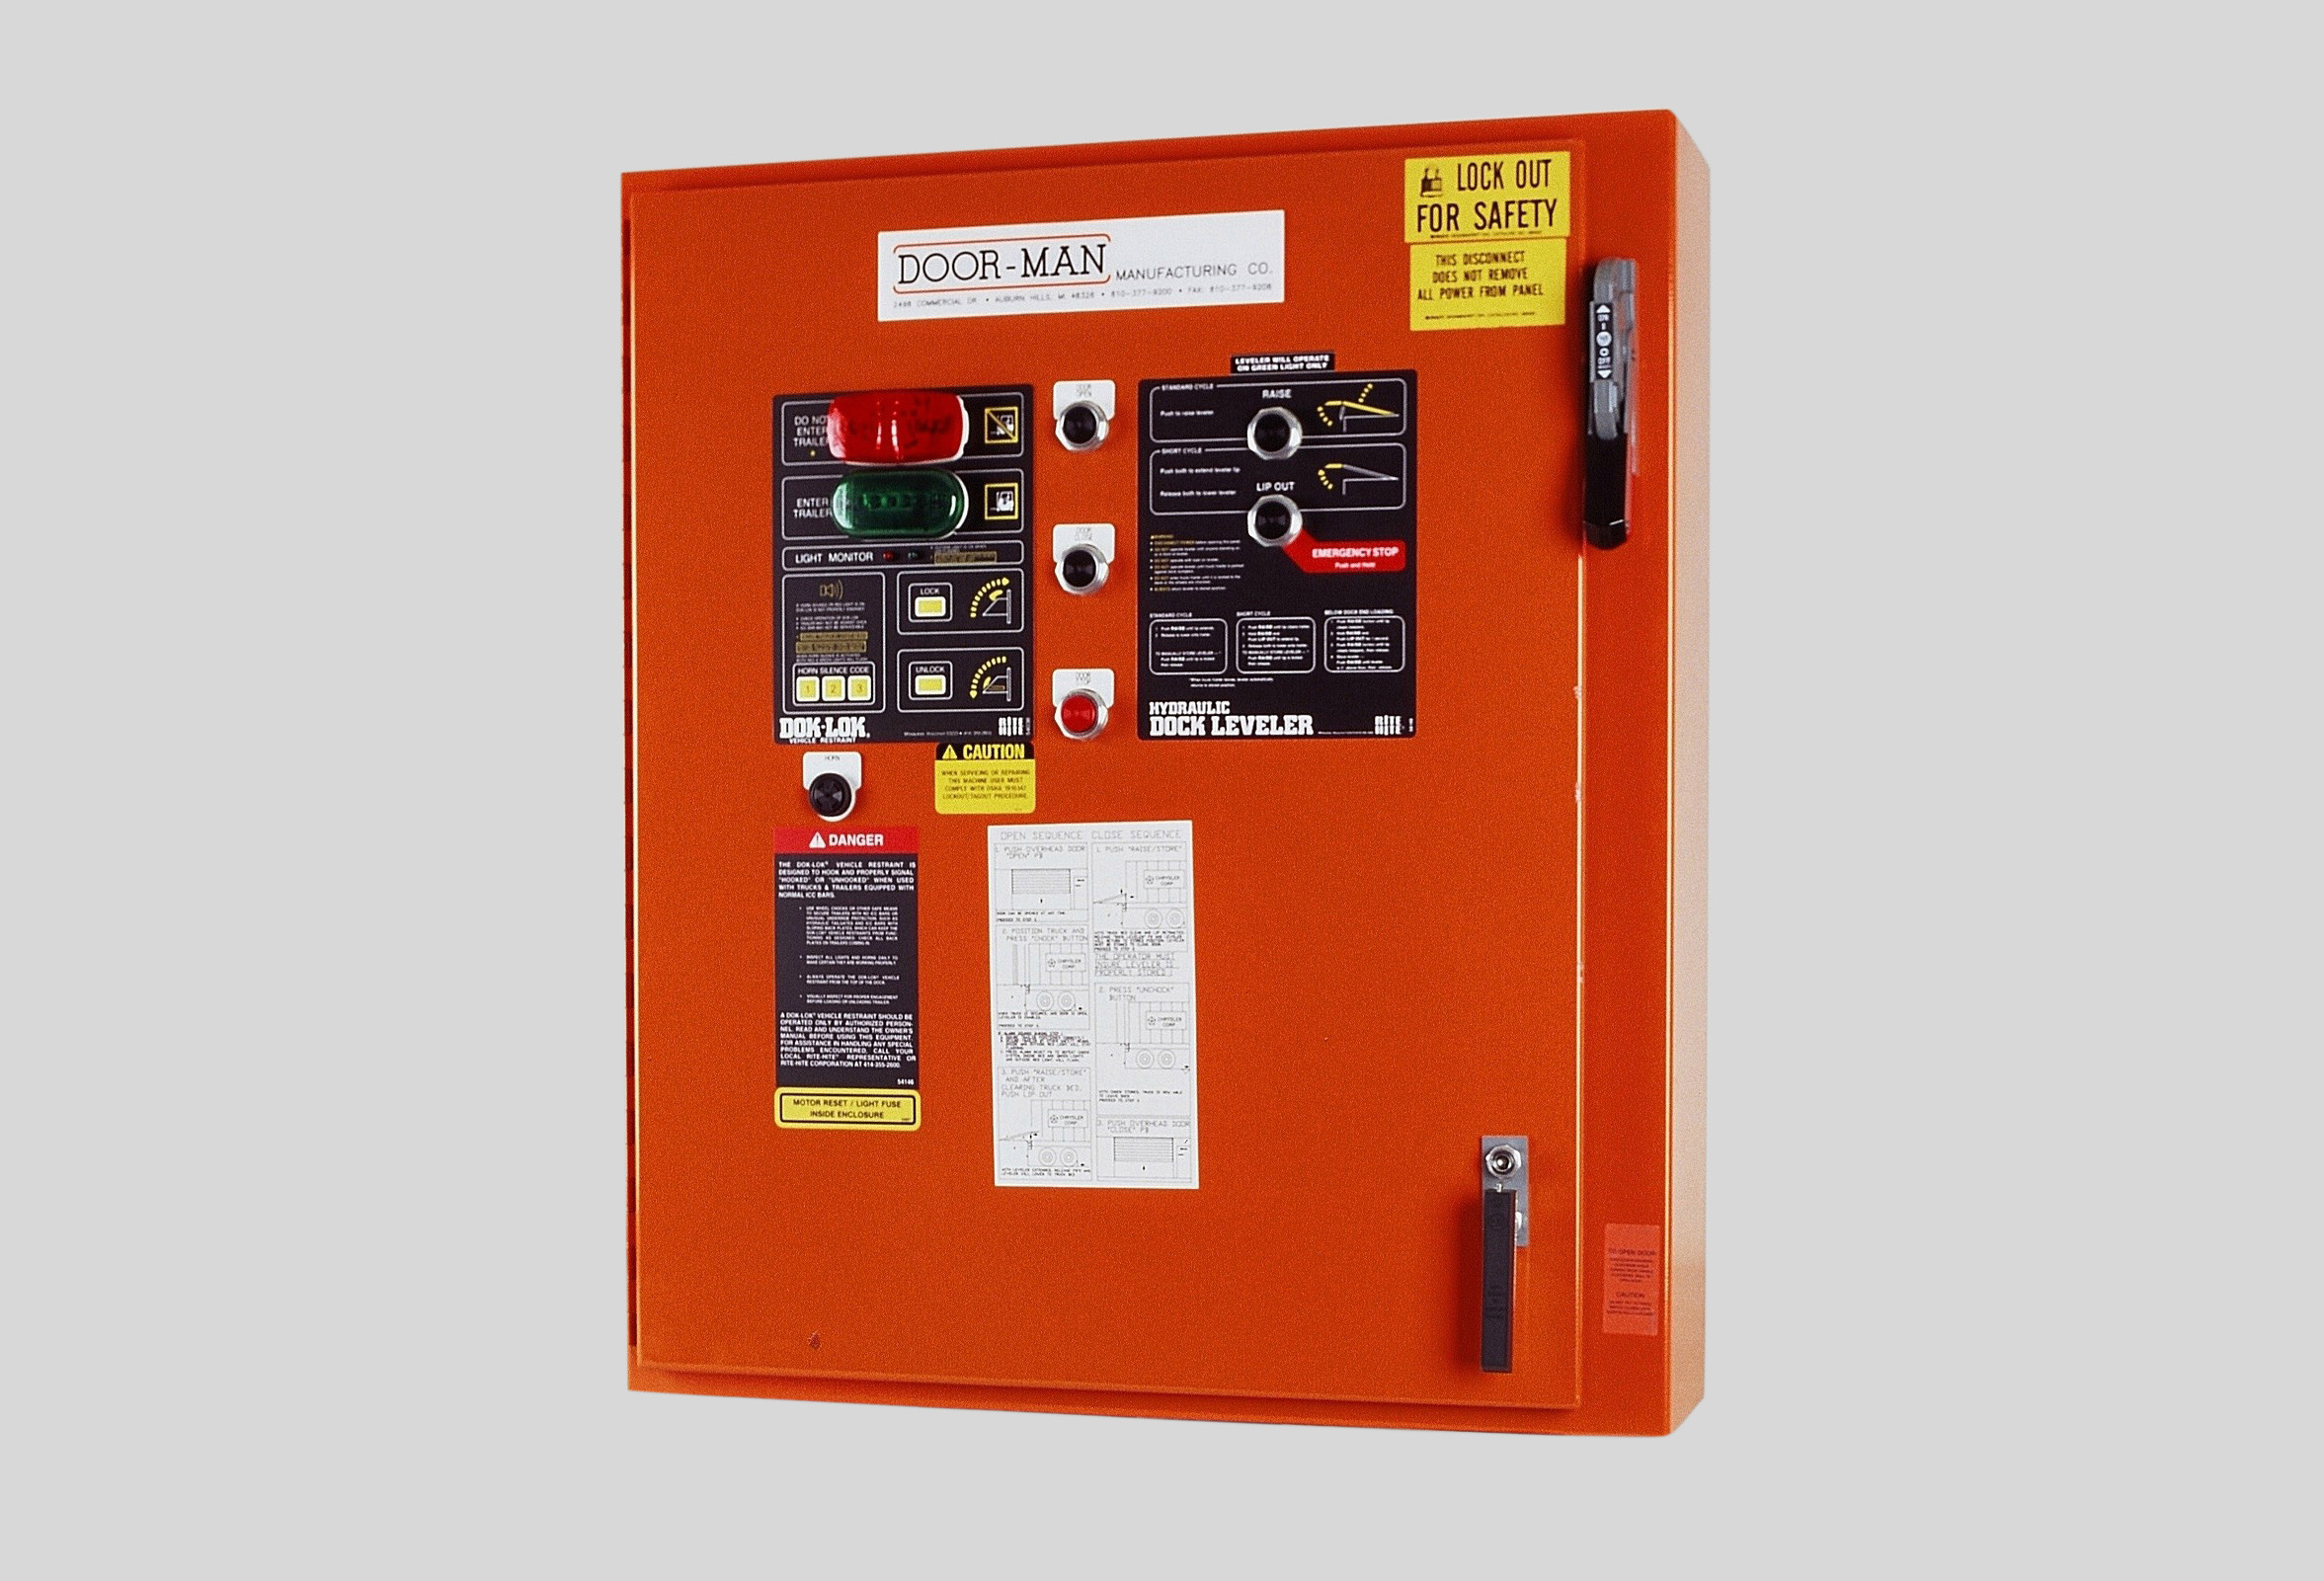 Combination dock control panel allows for operational commonality at the loading dock